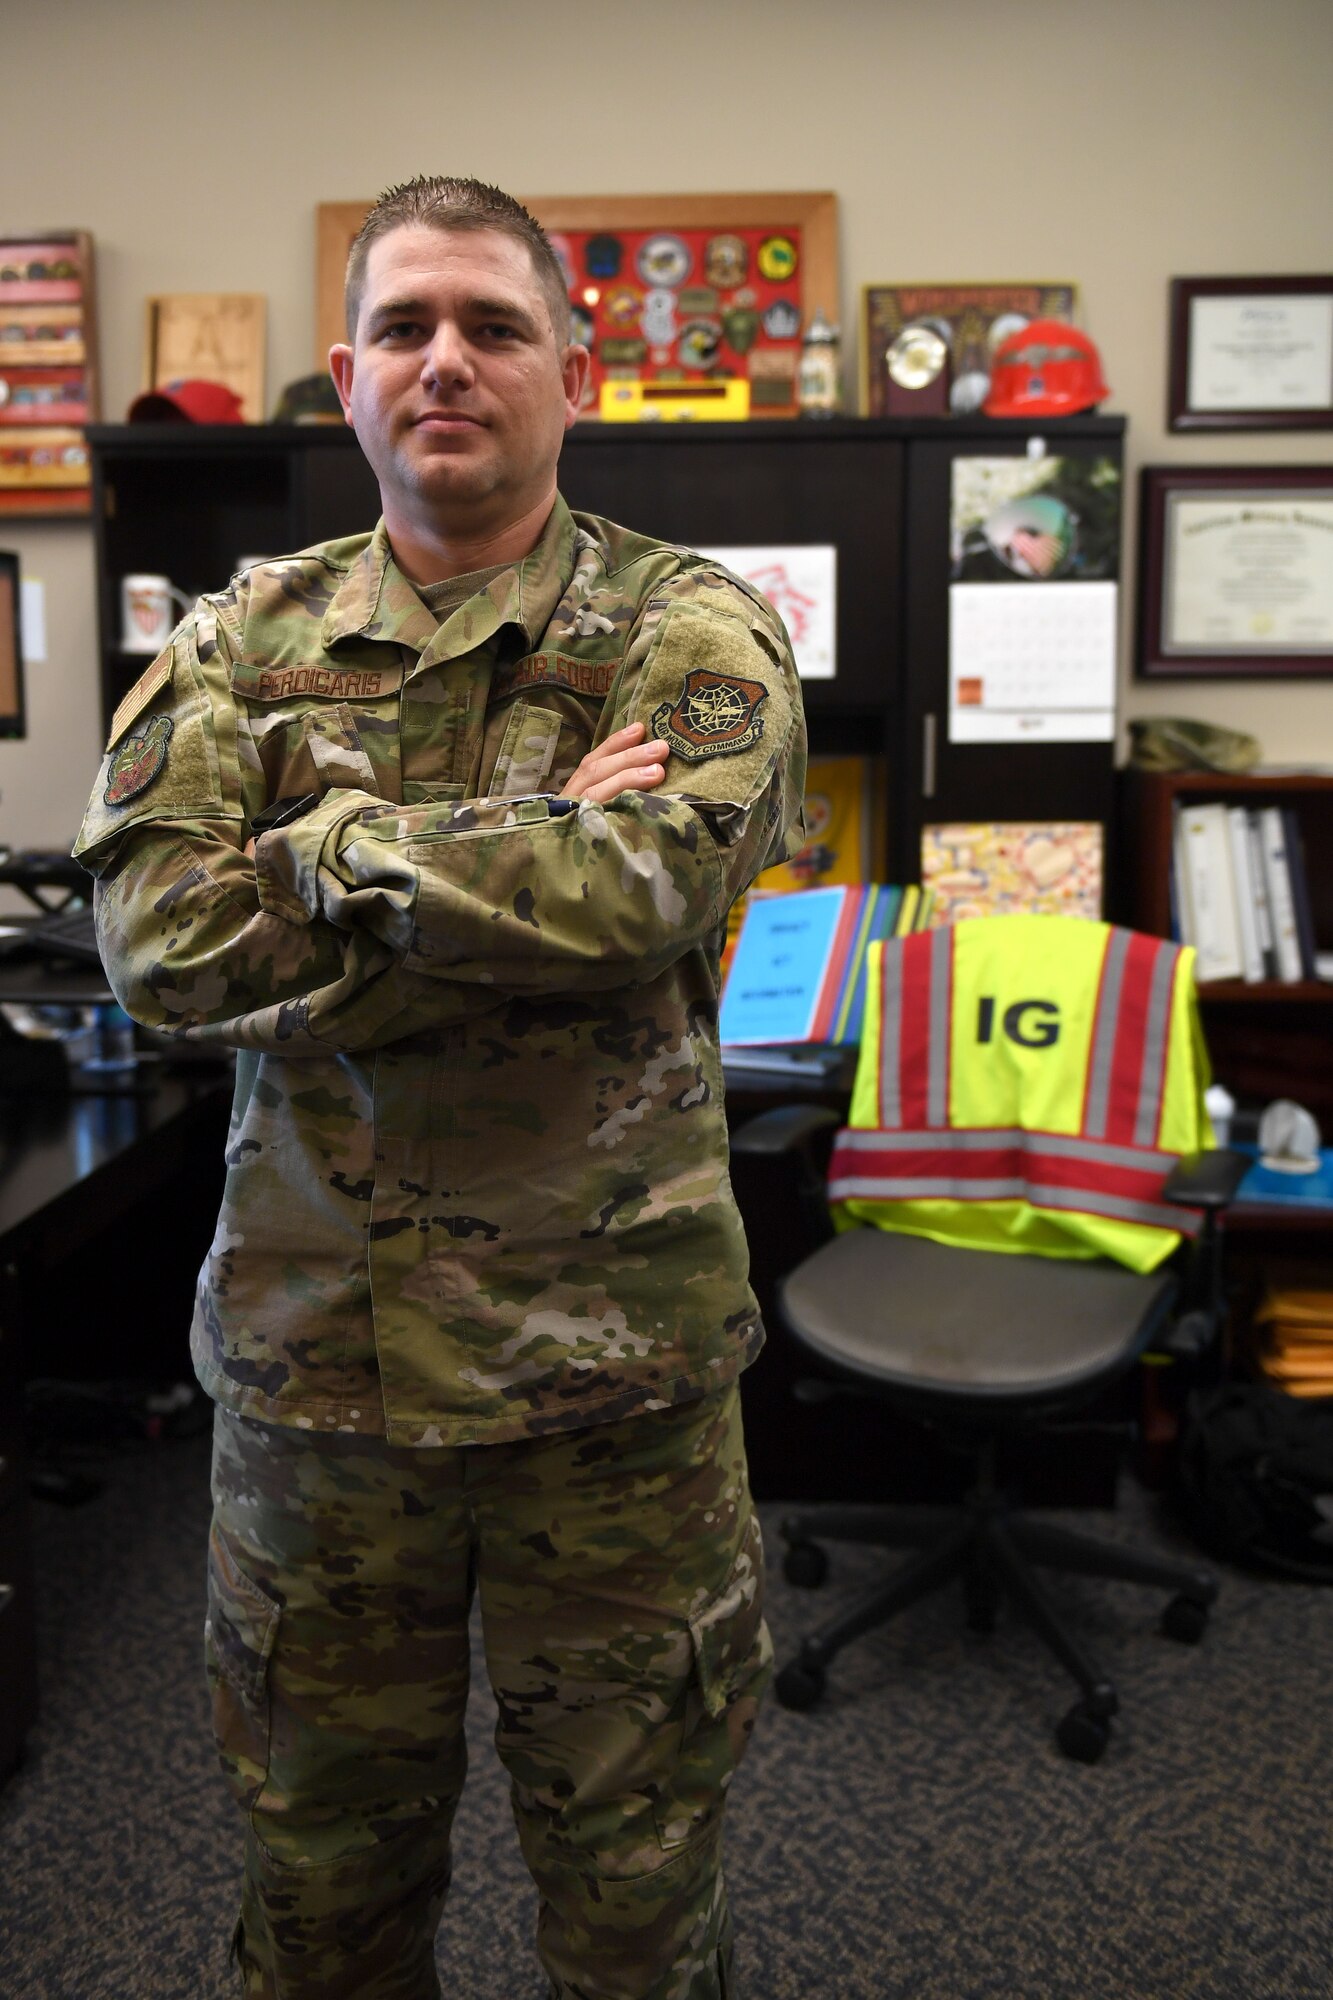 A man in a multi colored uniform stands with his arms folded in front of a desk.